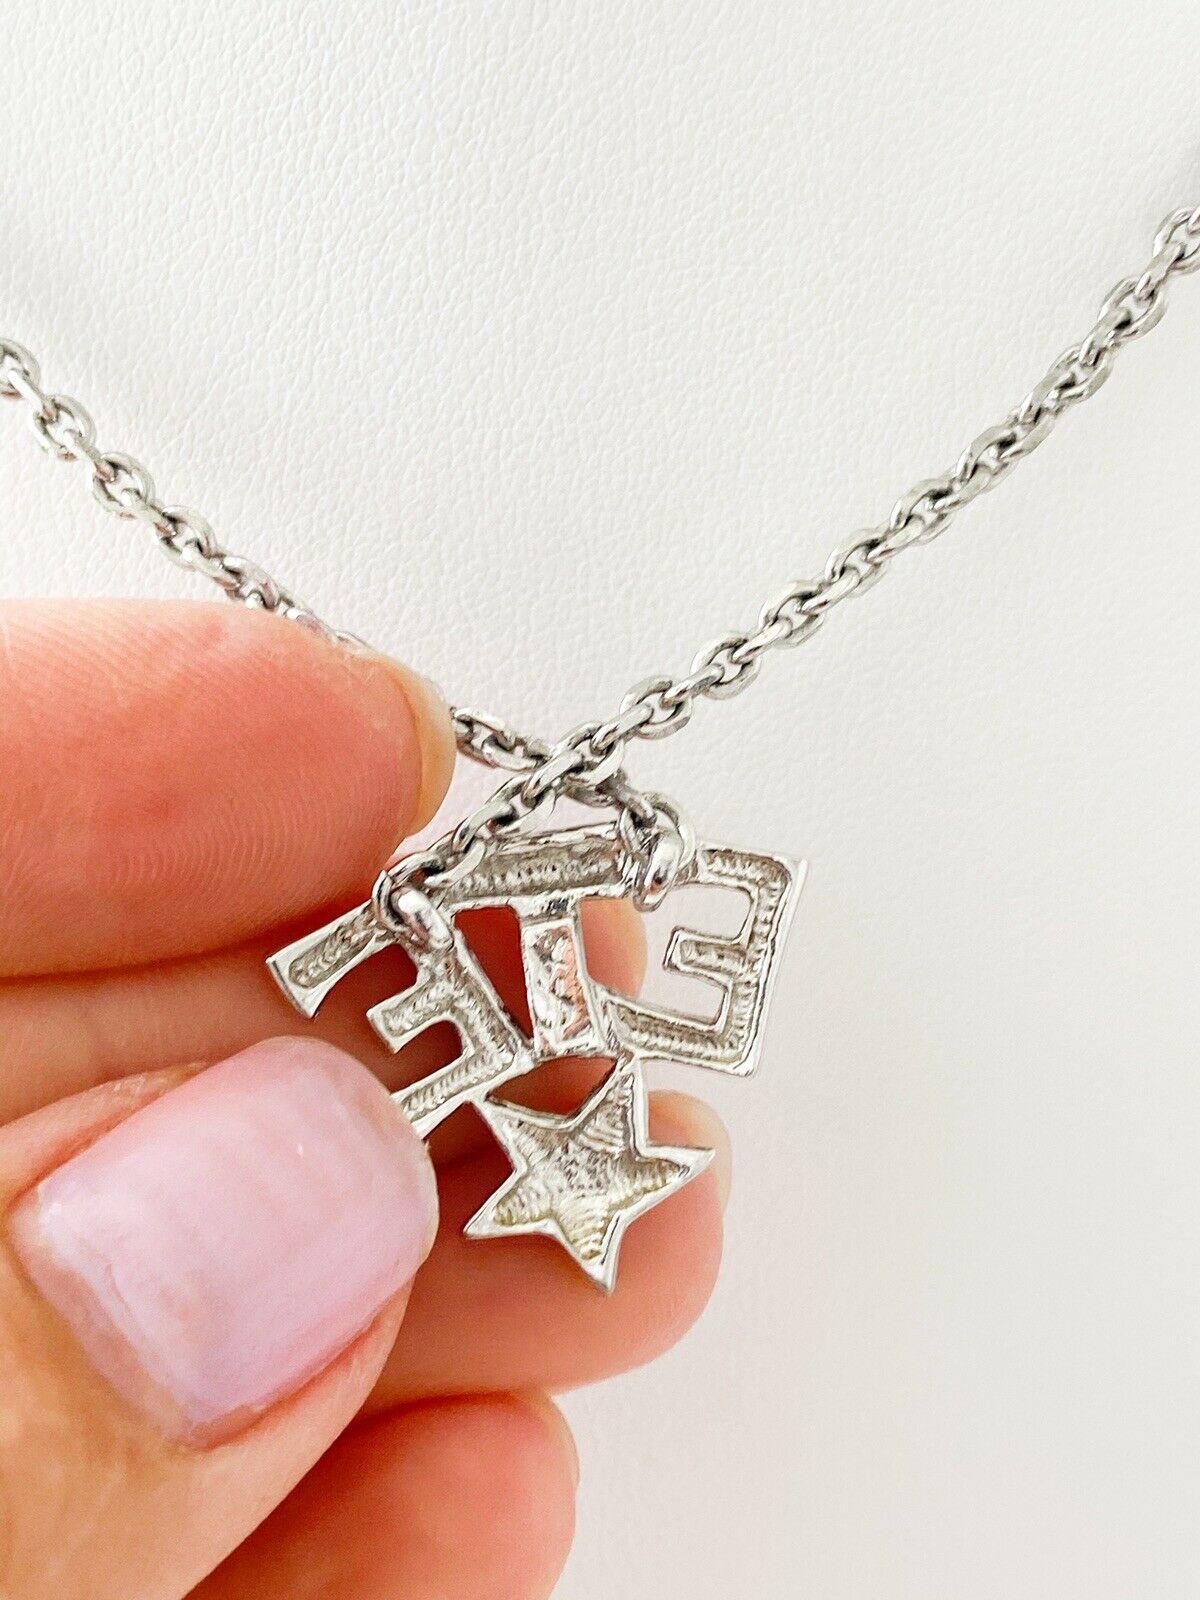 【SOLD OUT】YSL Yves Saint Laurent Vintage Silver Tone Star ETE Necklace Rhinestone